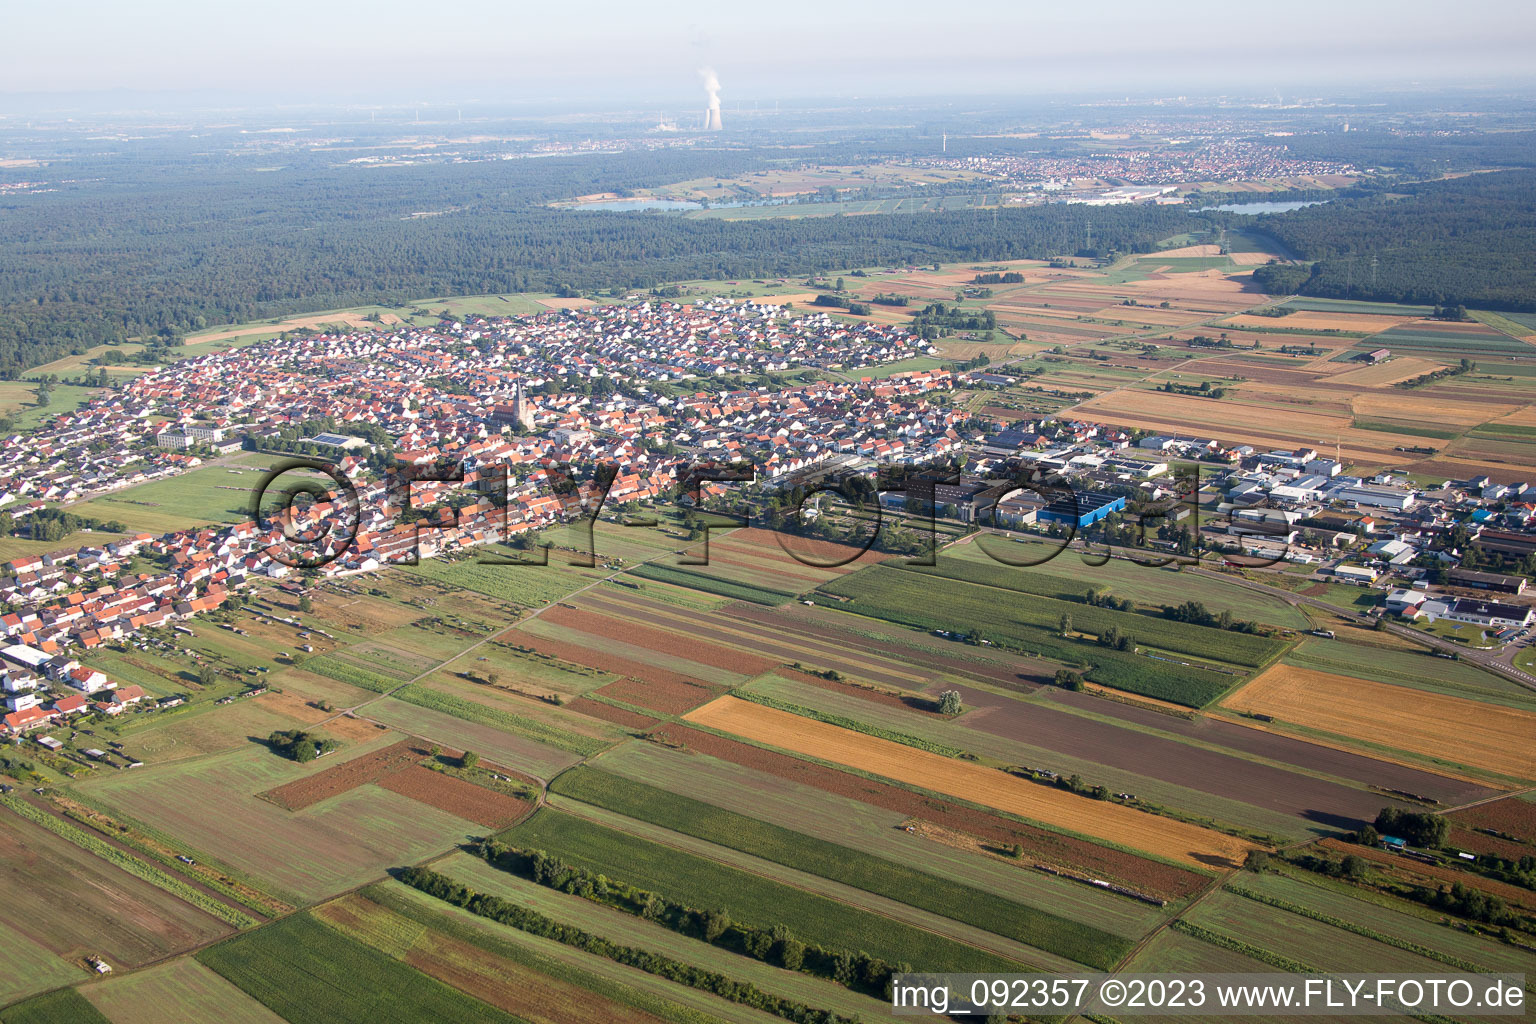 Hambrücken in the state Baden-Wuerttemberg, Germany from the plane